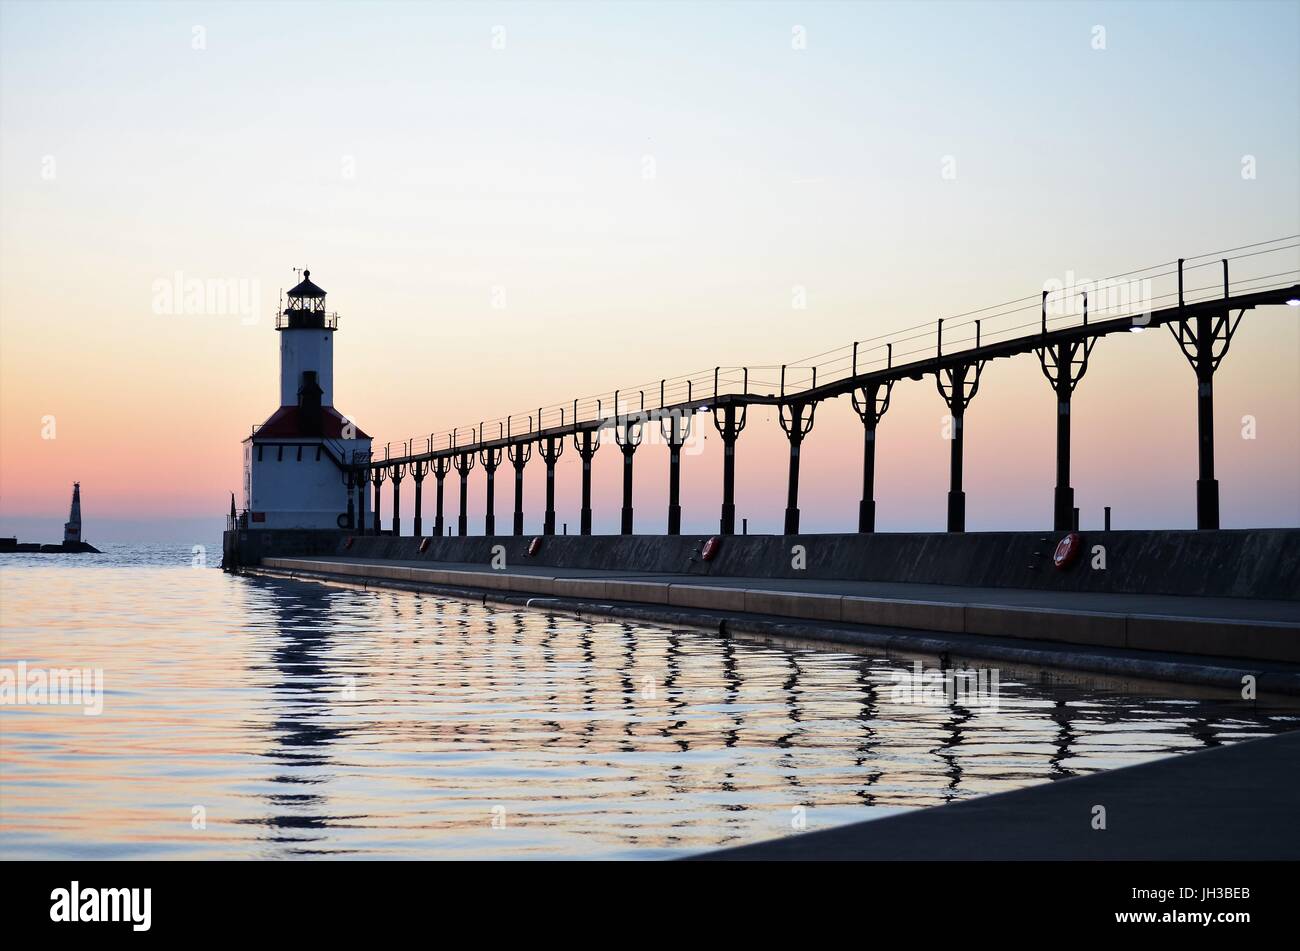 Images of the historic, iconic Michigan City lighthouse at Washington Beach in Michigan City, Indiana. Stock Photo